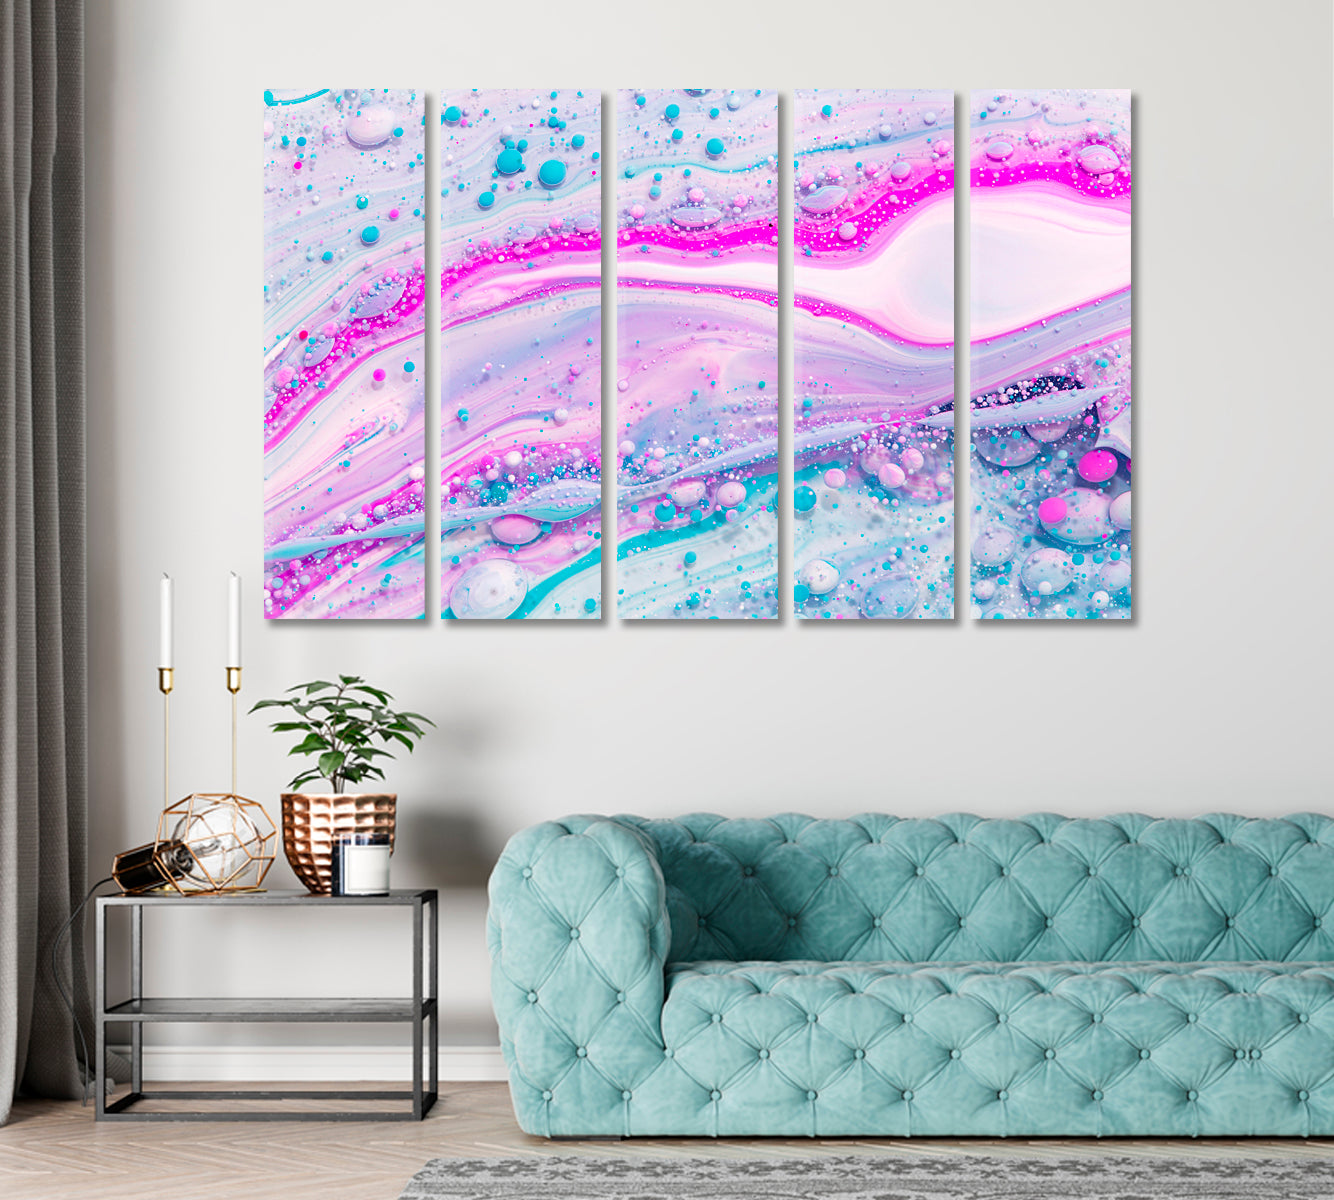 Fluid Abstract Mixed Paint Flowing Bubbles Canvas Print ArtLexy 5 Panels 36"x24" inches 